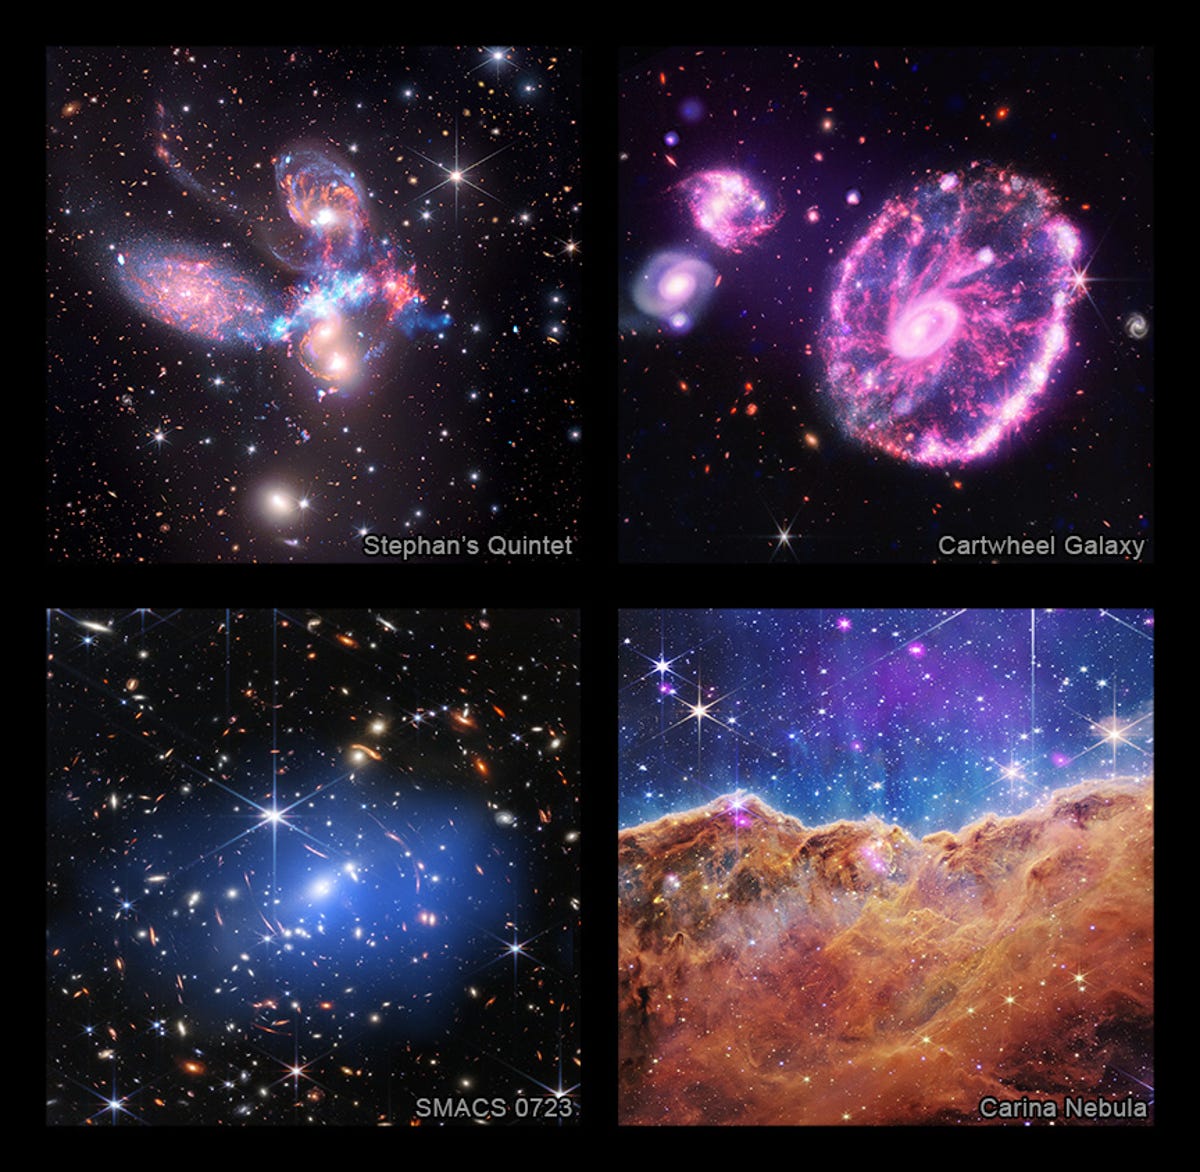 Top left is the composite image of the Stefan Quintet, top right shows the Cartwheel galaxy, bottom left is the first Webb Deep Field, and bottom right is the Carina Nebula.